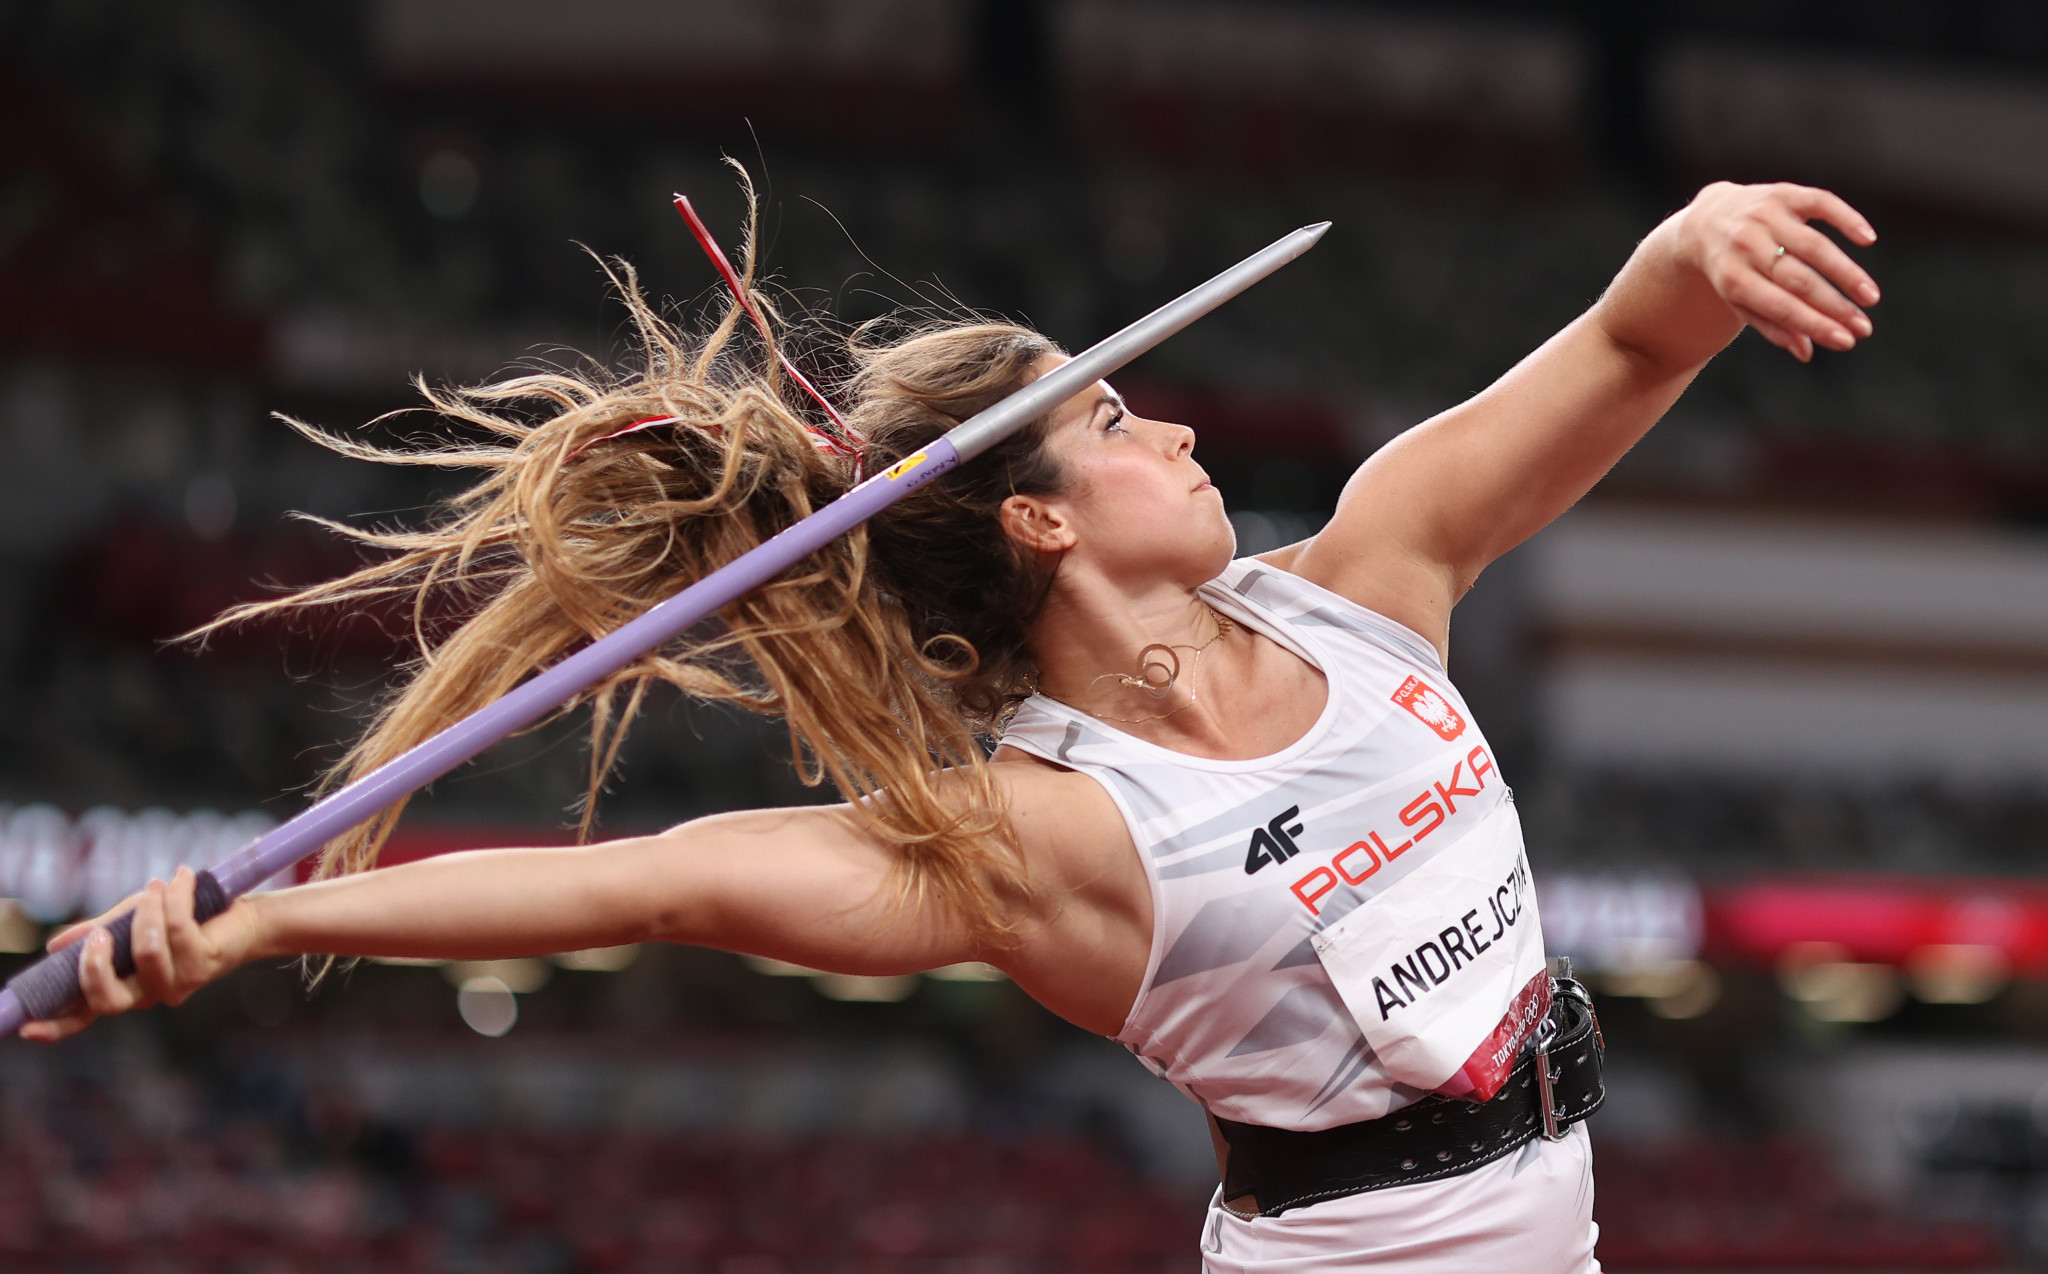 Maria Andrejczyk's recorded a throw of 64.61m in the Tokyo 2020 women's javelin final ©Getty Images